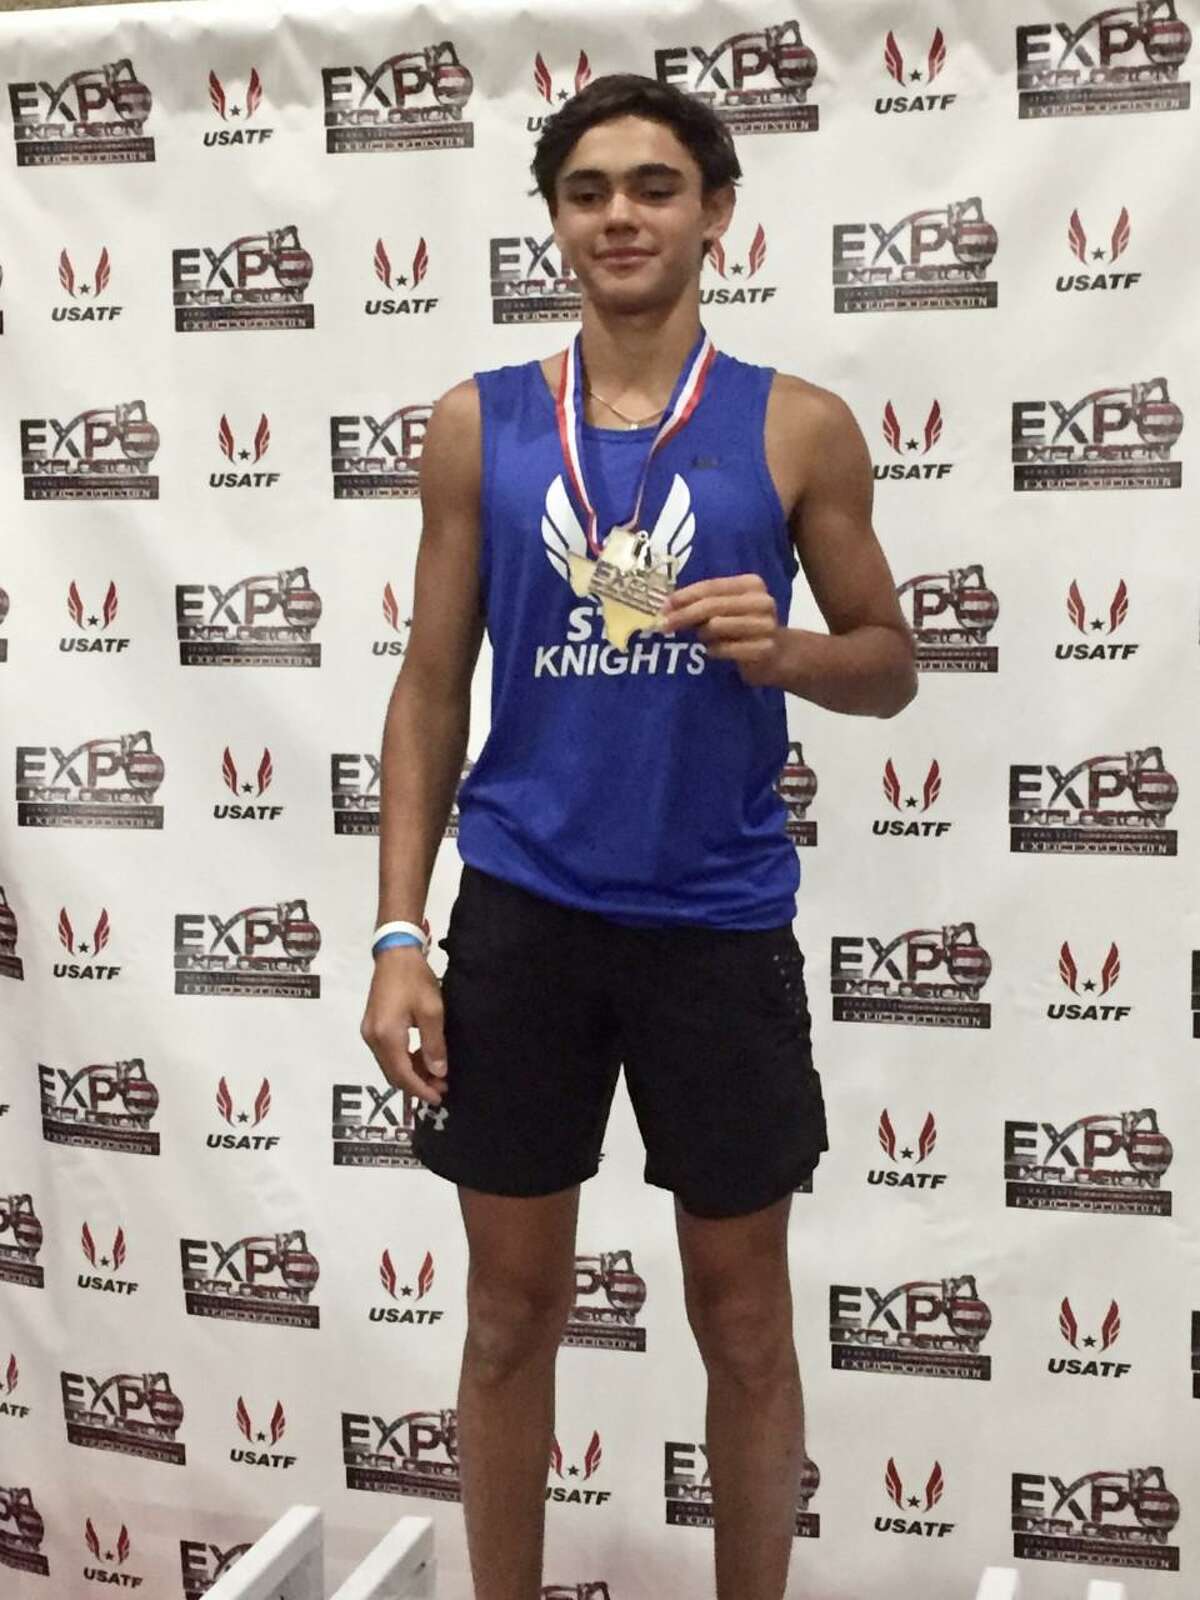 St. Augustine’s Efram Melendez cleared 14-foot-8 last week to take first place at the Texas EXPO Explosion pole vault meet.